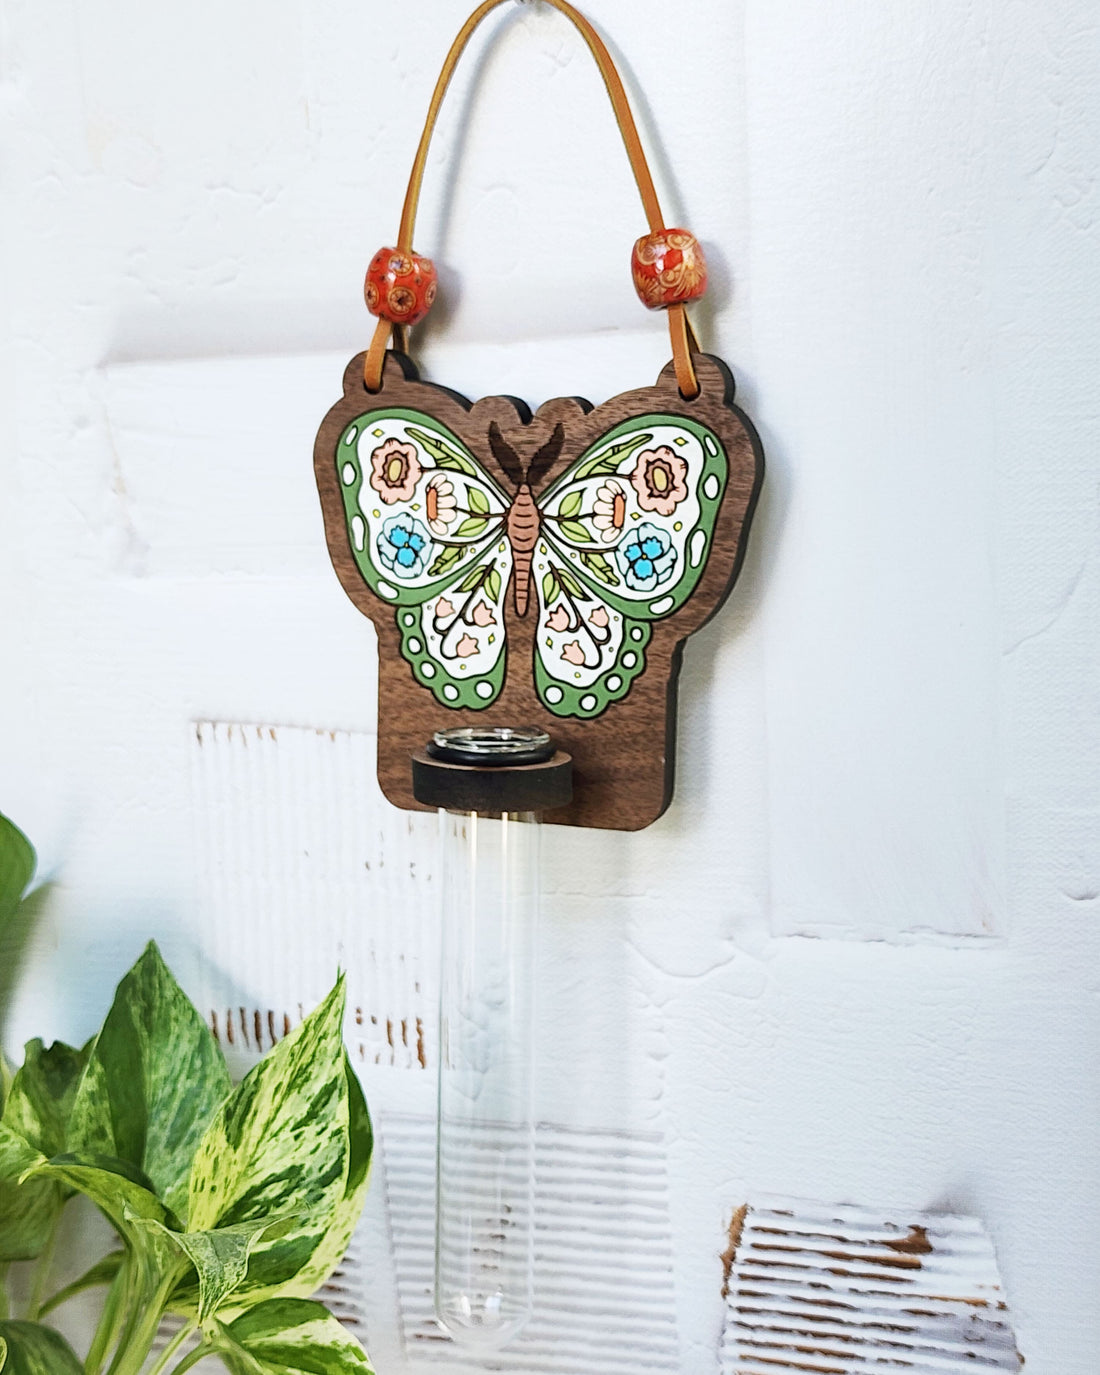 propagation station with a butterfly with flowers in its wings painted on it, hanging on a white wall